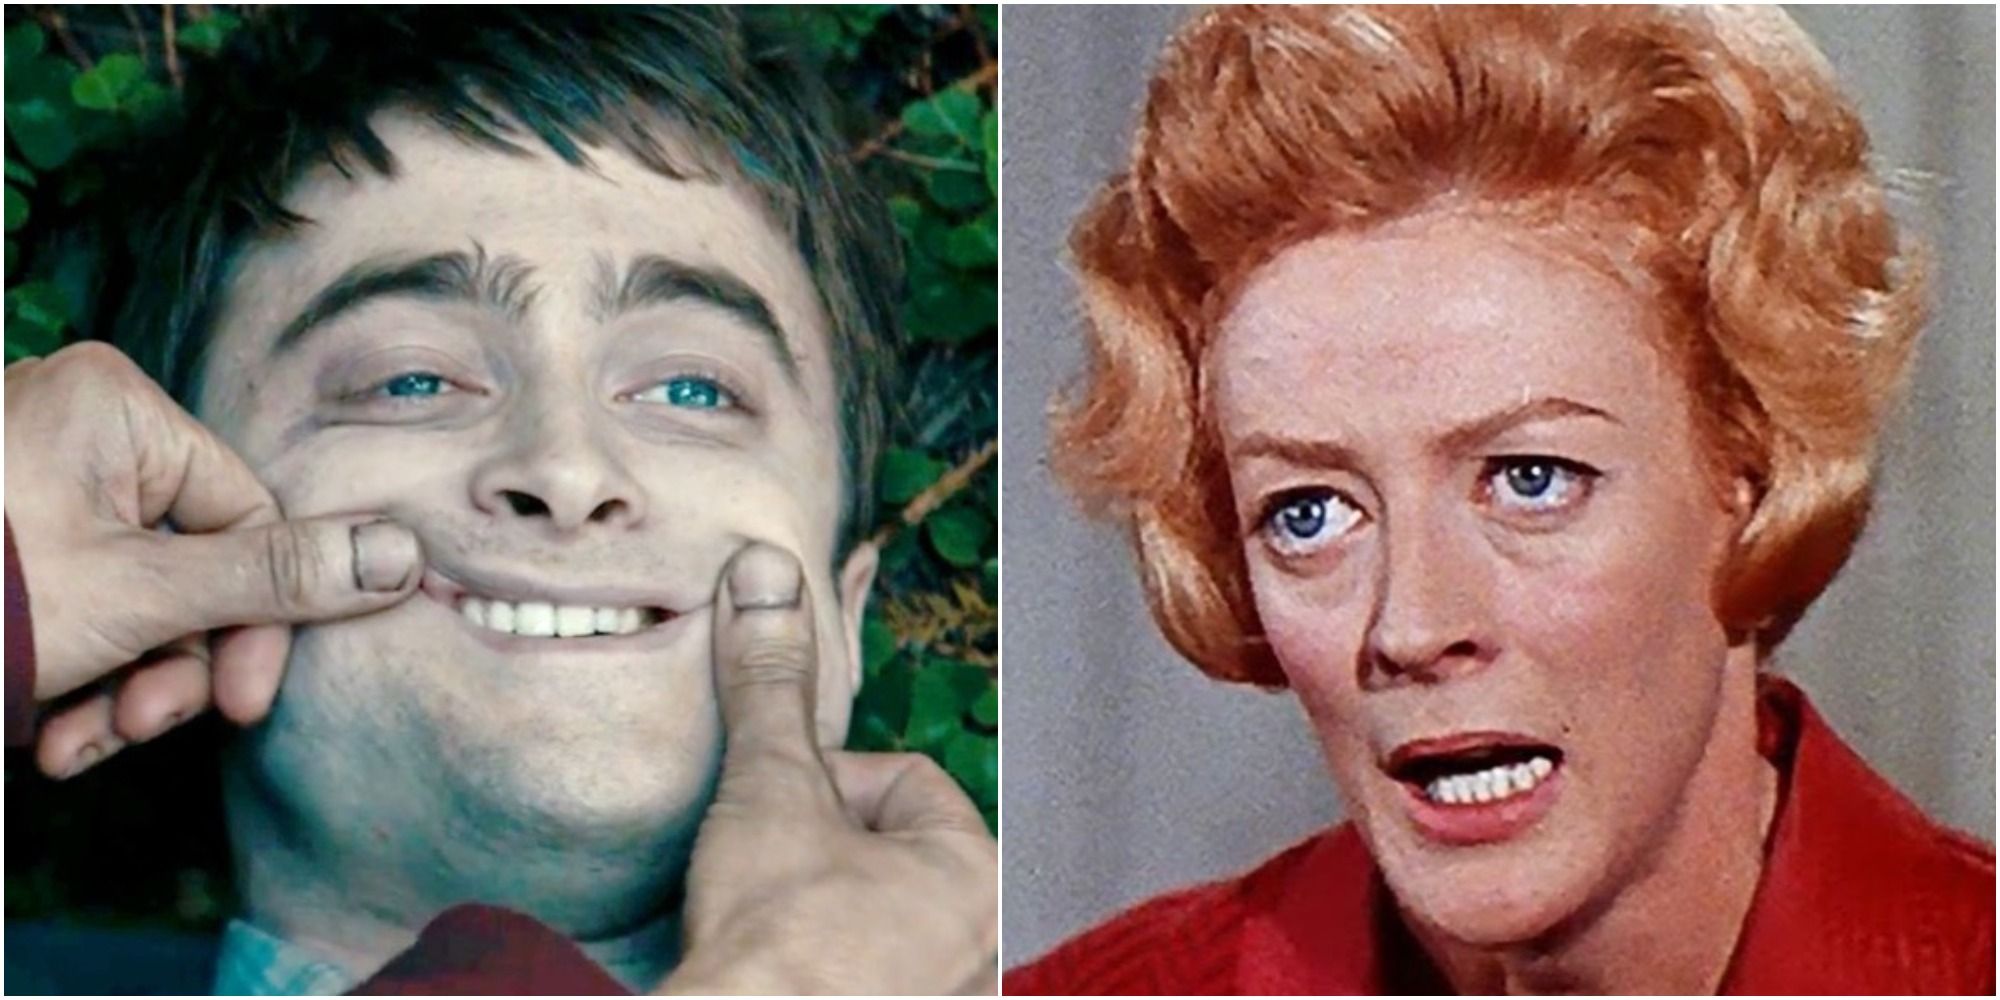 Swiss Army Man and The Prime of Miss Jean Brodie